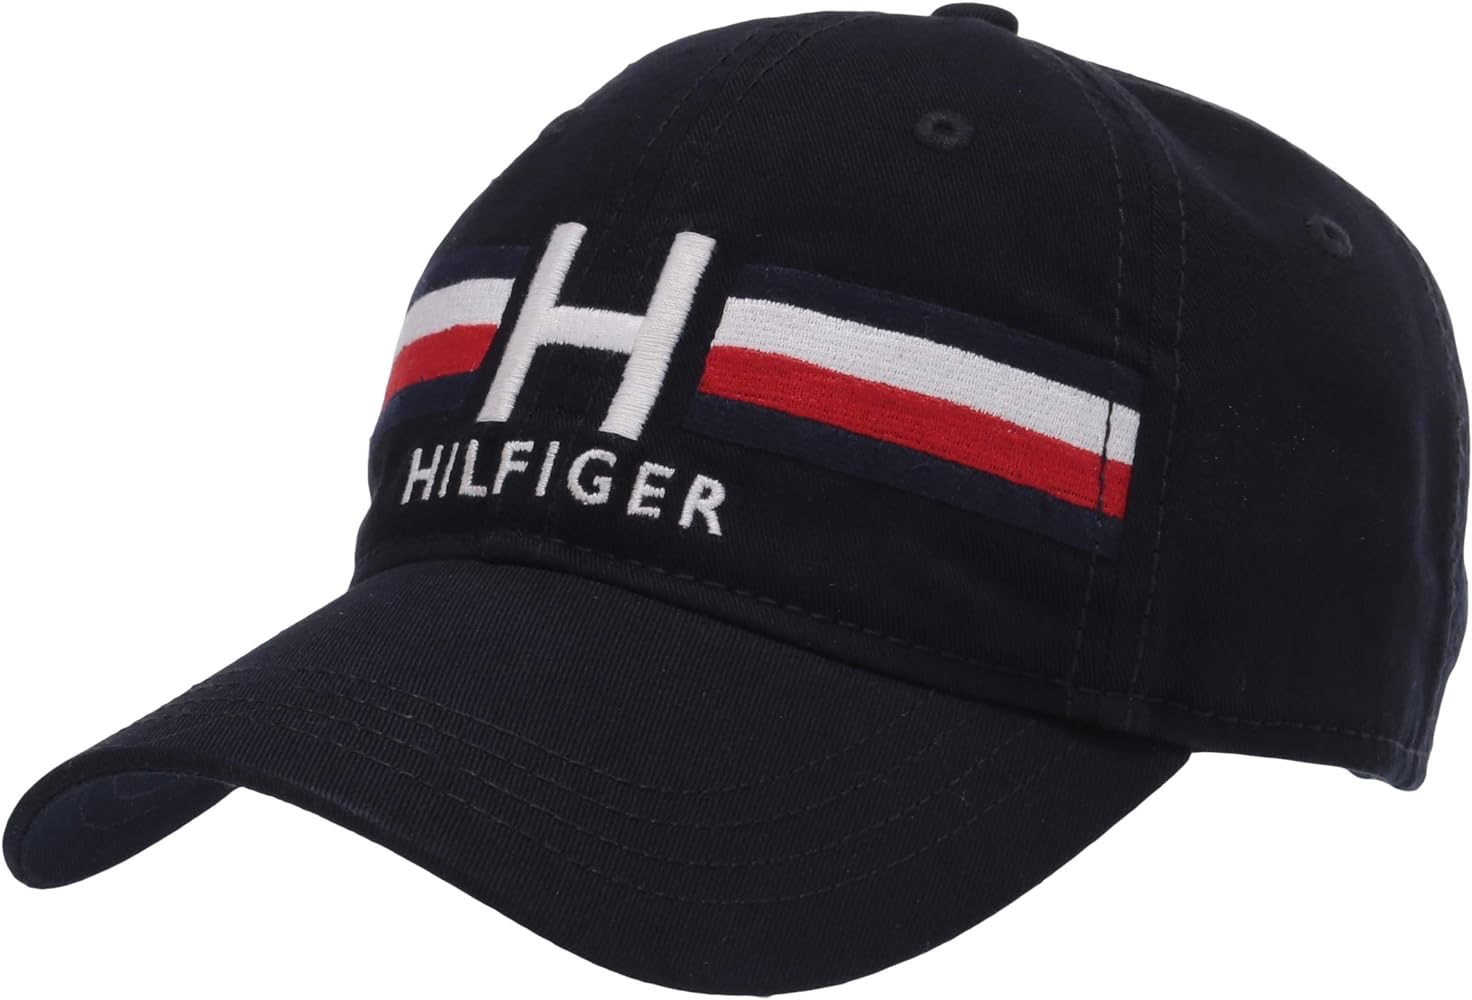 Tommy Hilfiger Men’s Cotton Ira Adjustable Baseball Cap (Pack of 1), Sky Cap (Pack of 1)tain, One Size at Amazon Men’s Clothing store